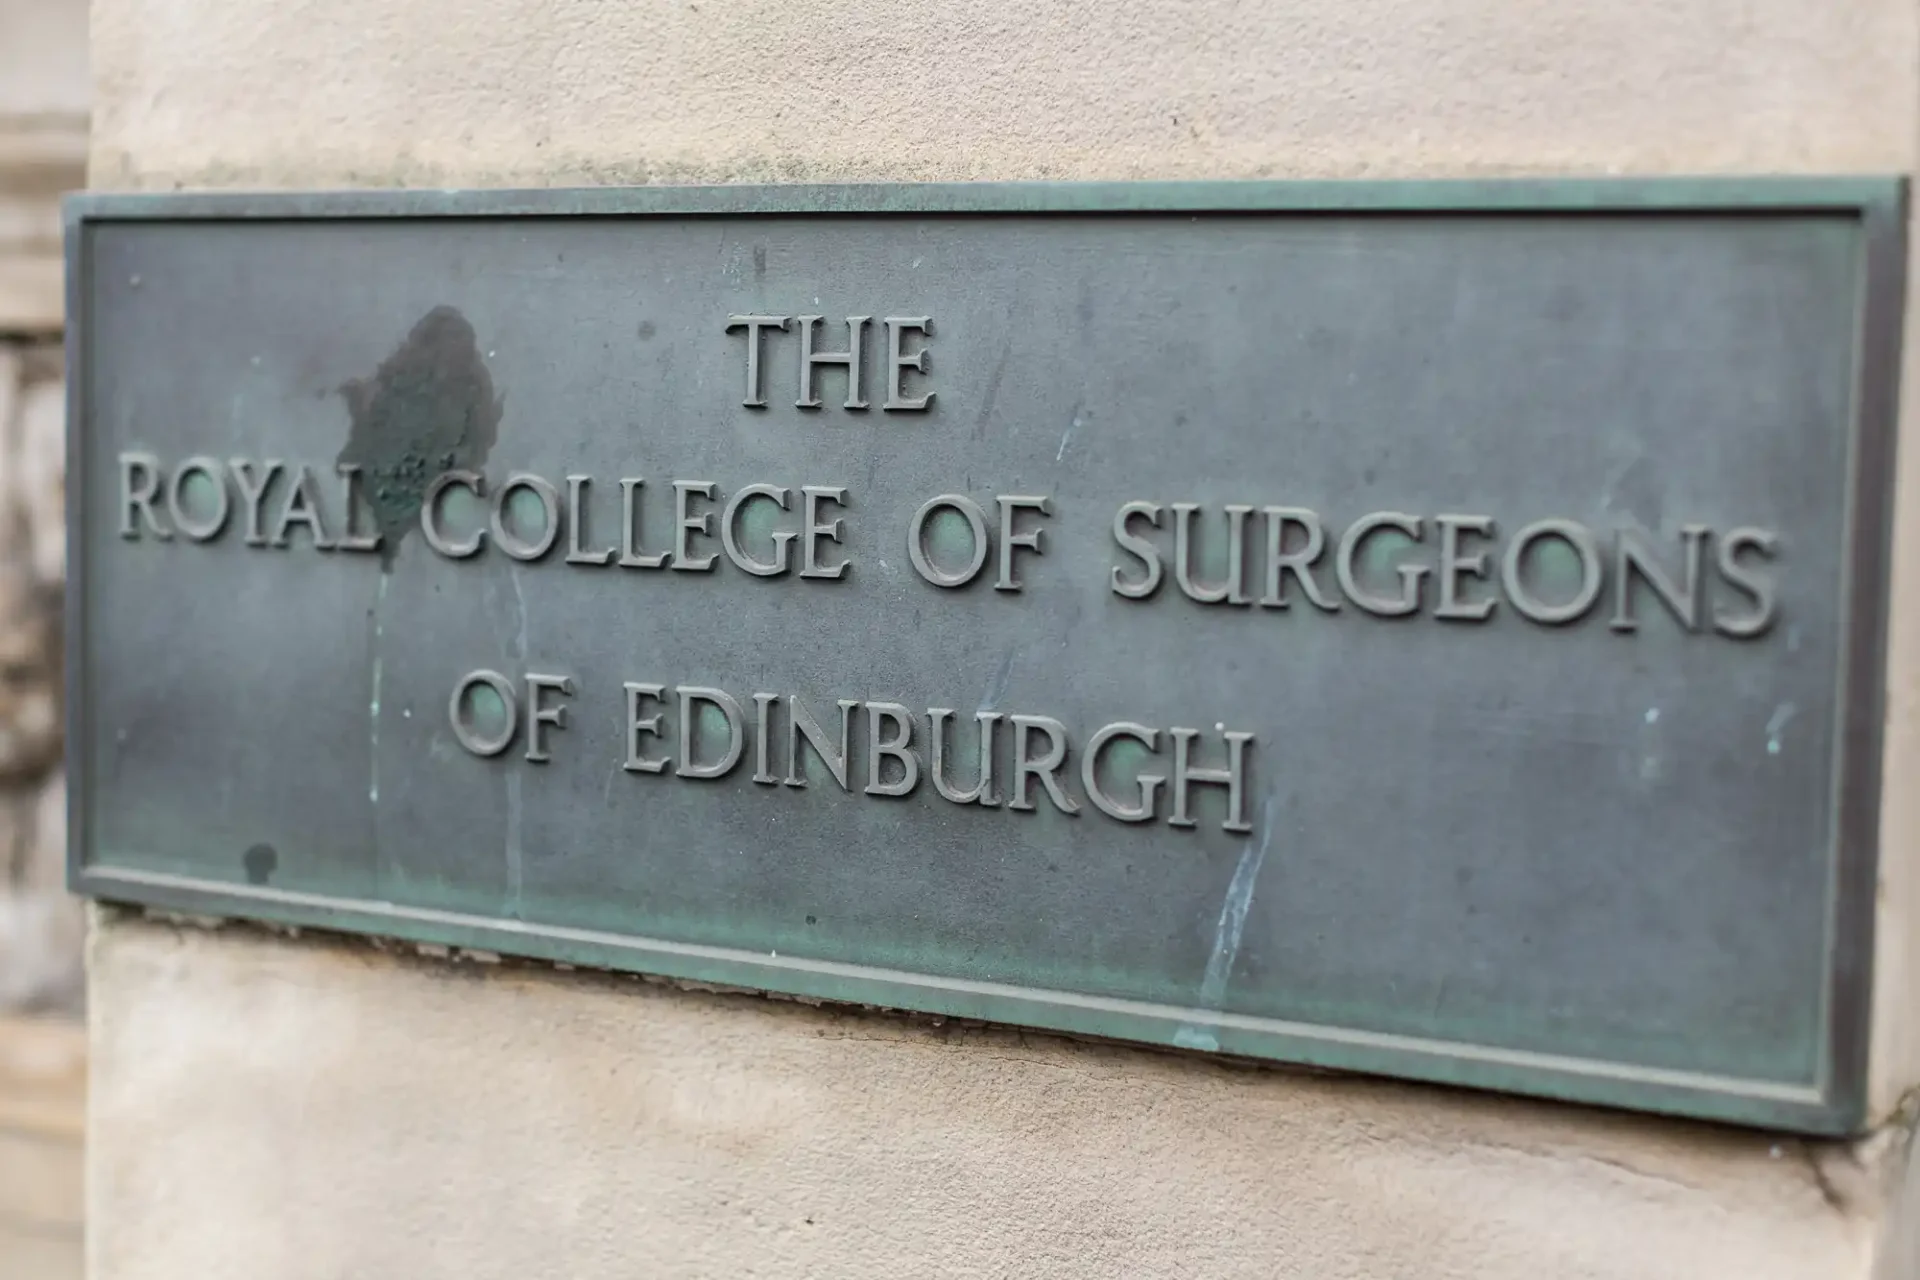 Bronze plaque reading "the royal college of surgeons of edinburgh" on a stone wall, with slight wear marks.